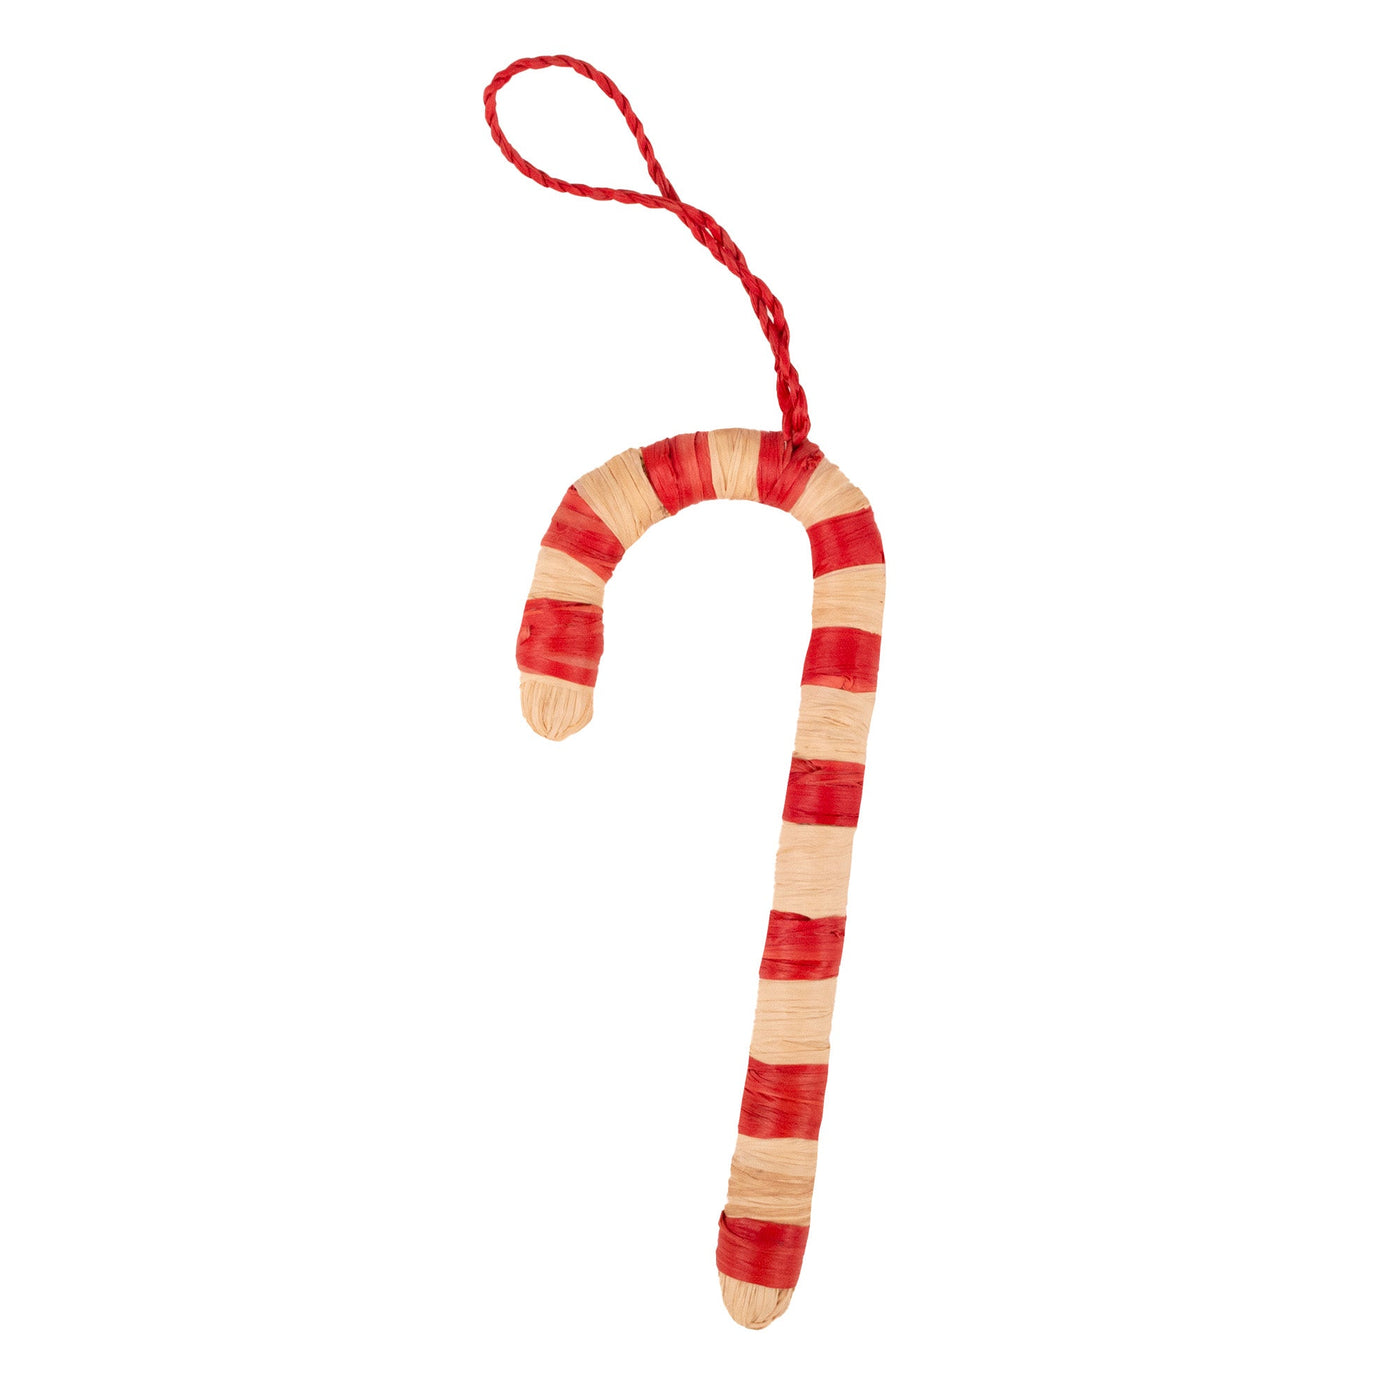 4.5" Candy Cane Ornament